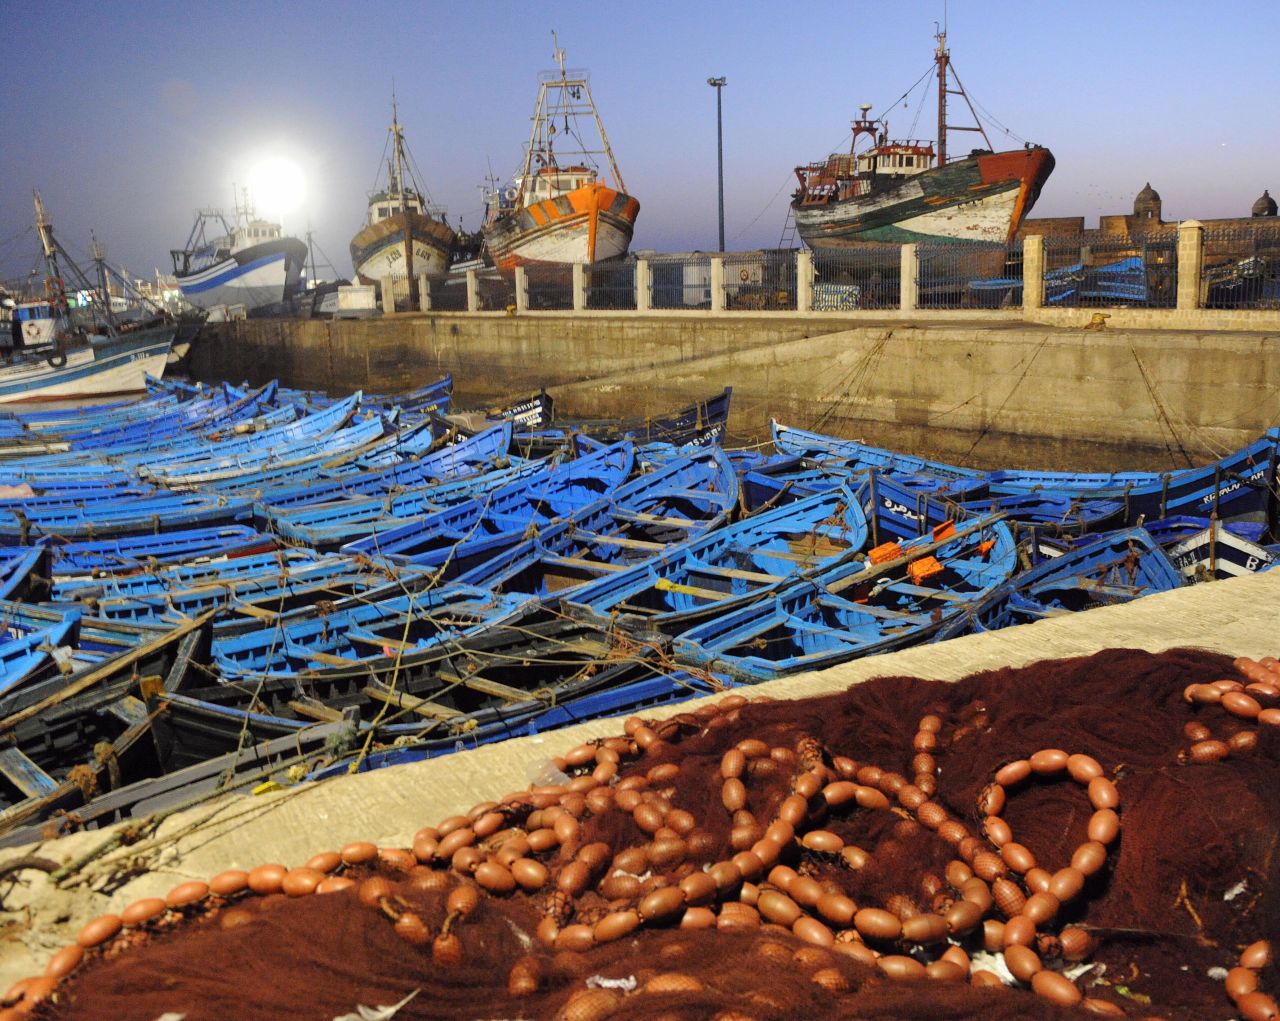 For many years, fishing was the major industry in the town of Essaouira. Lately, the stocks in the ocean have depleted, causing many local fisherman to struggle financially. 